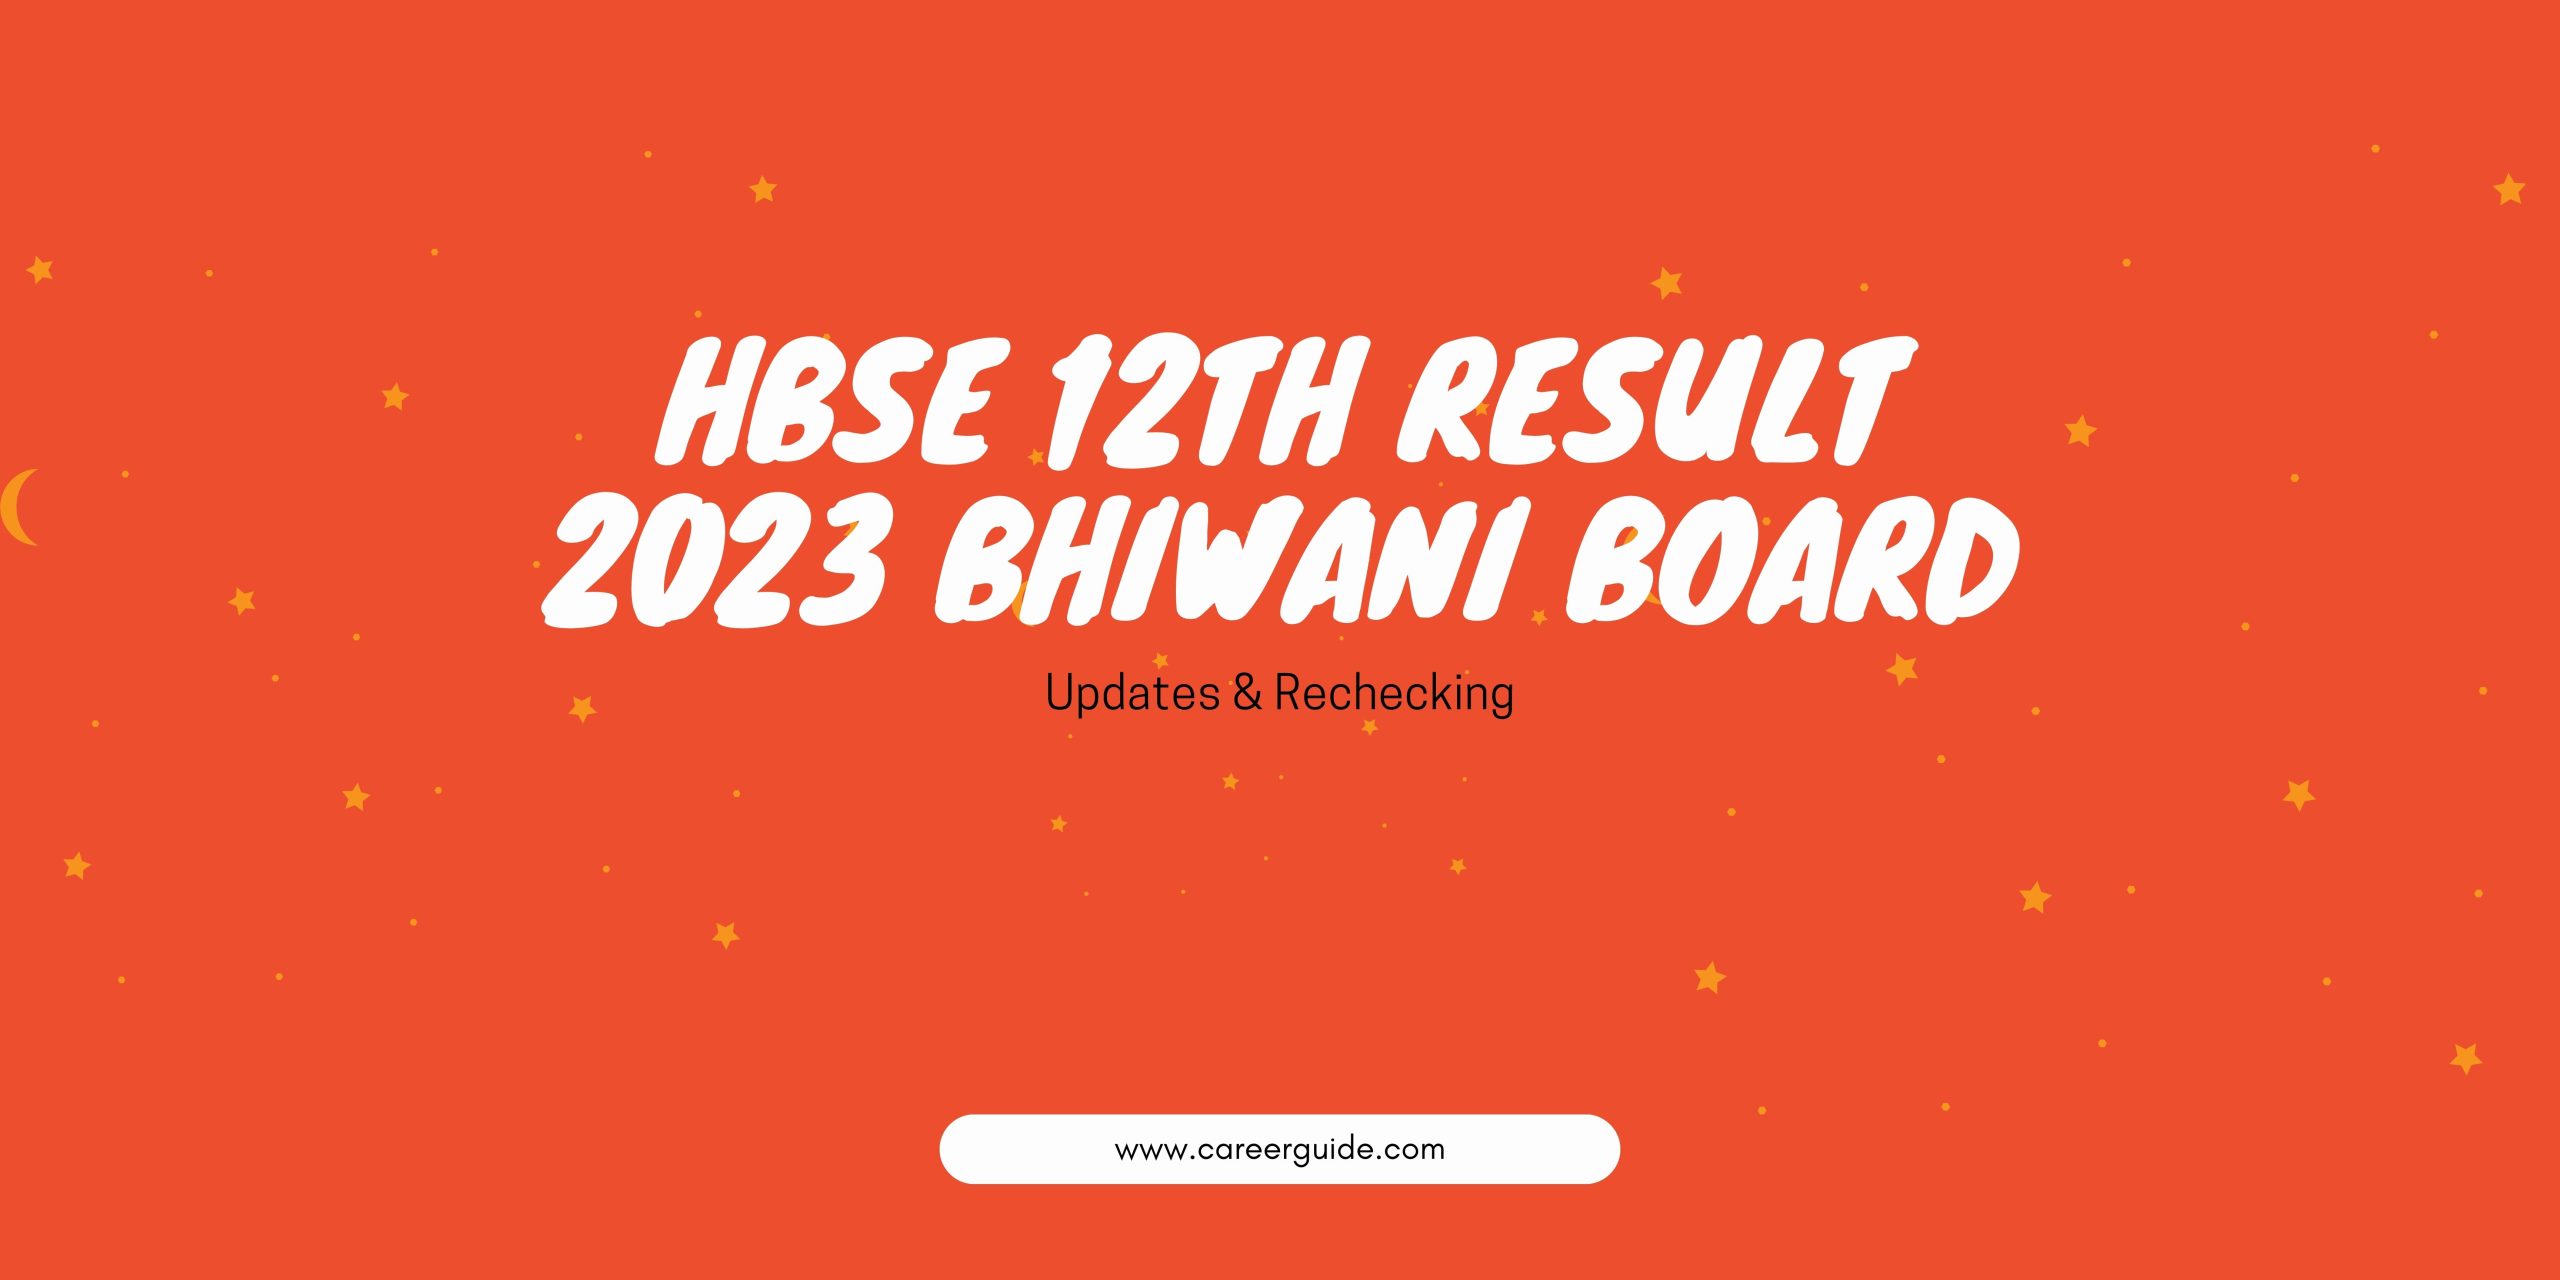 HBSE 12th Result 2023 Bhiwani Board Updates & Rechecking CareerGuide